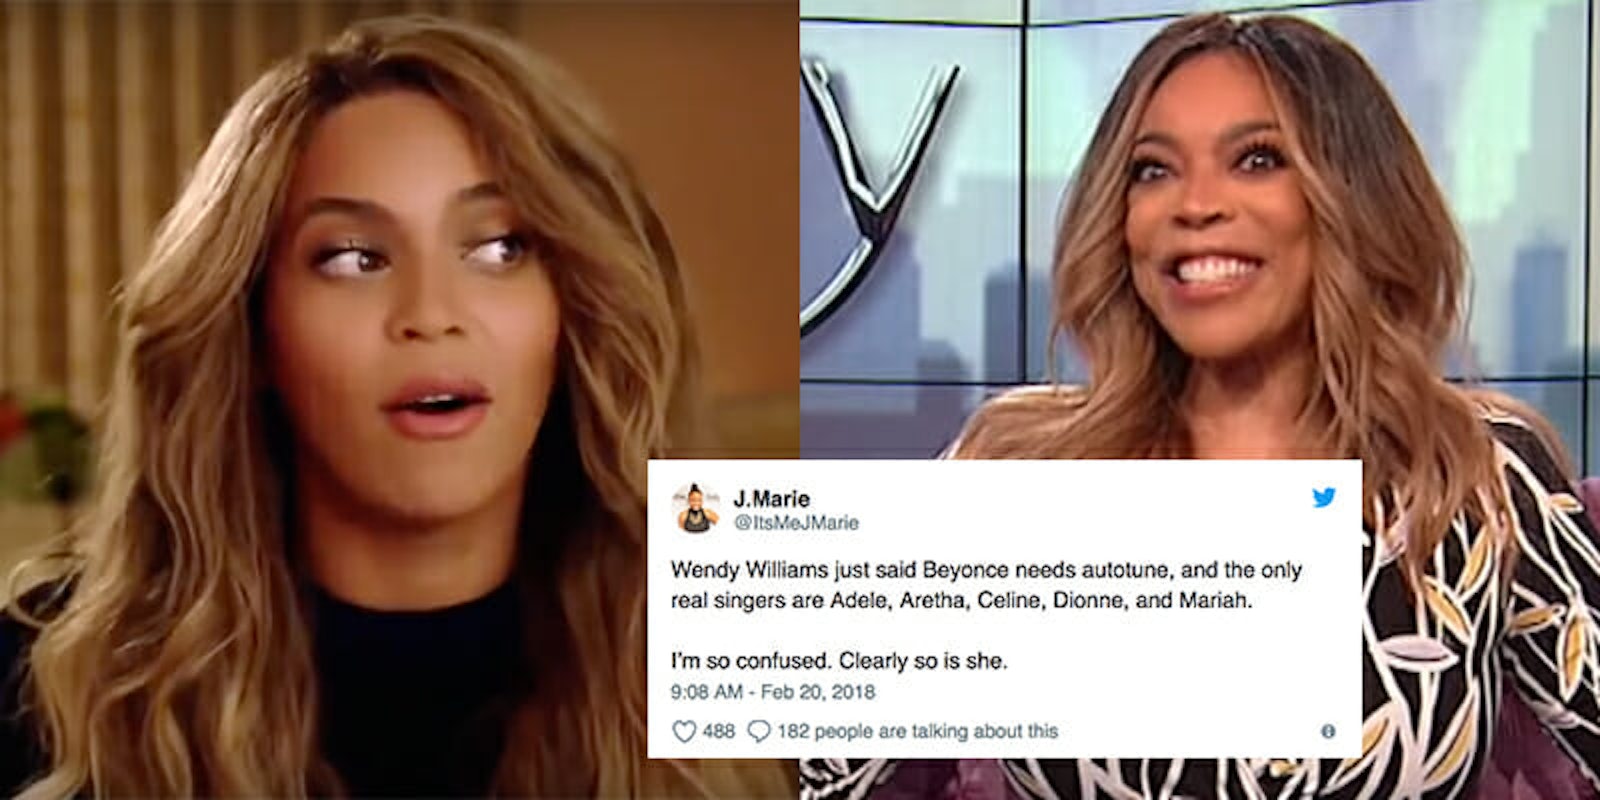 Wendy Williams said on her talk show that Beyoncé, among other artists, 'needs Auto-Tune.'